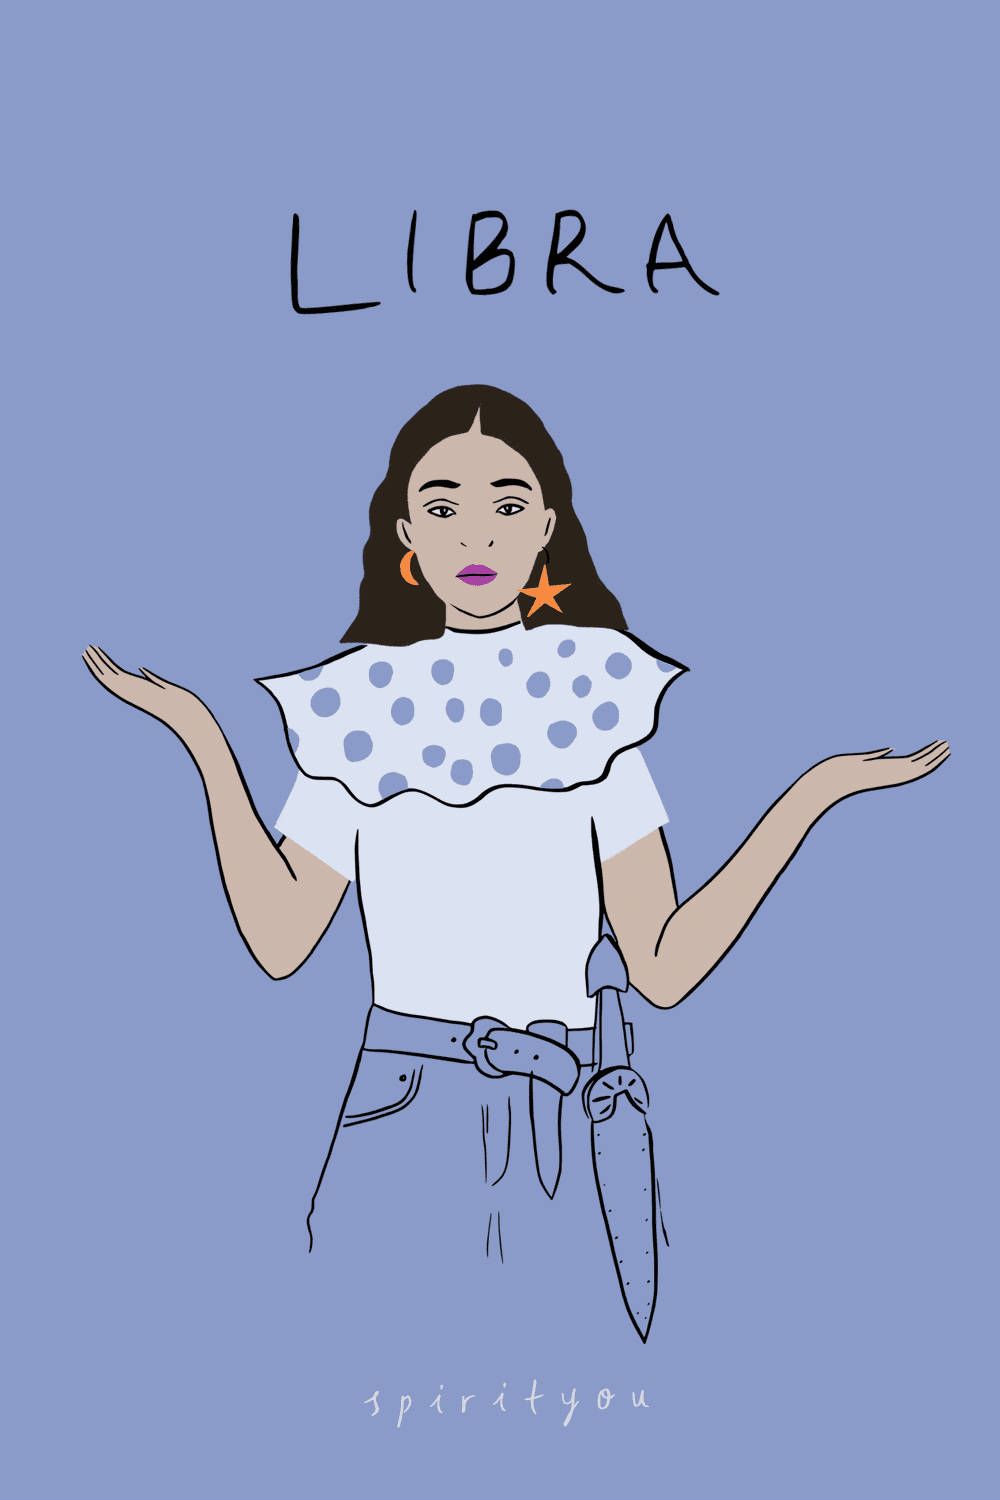 An illustration of a woman with a white blouse and blue jeans. She has her hands up in a 